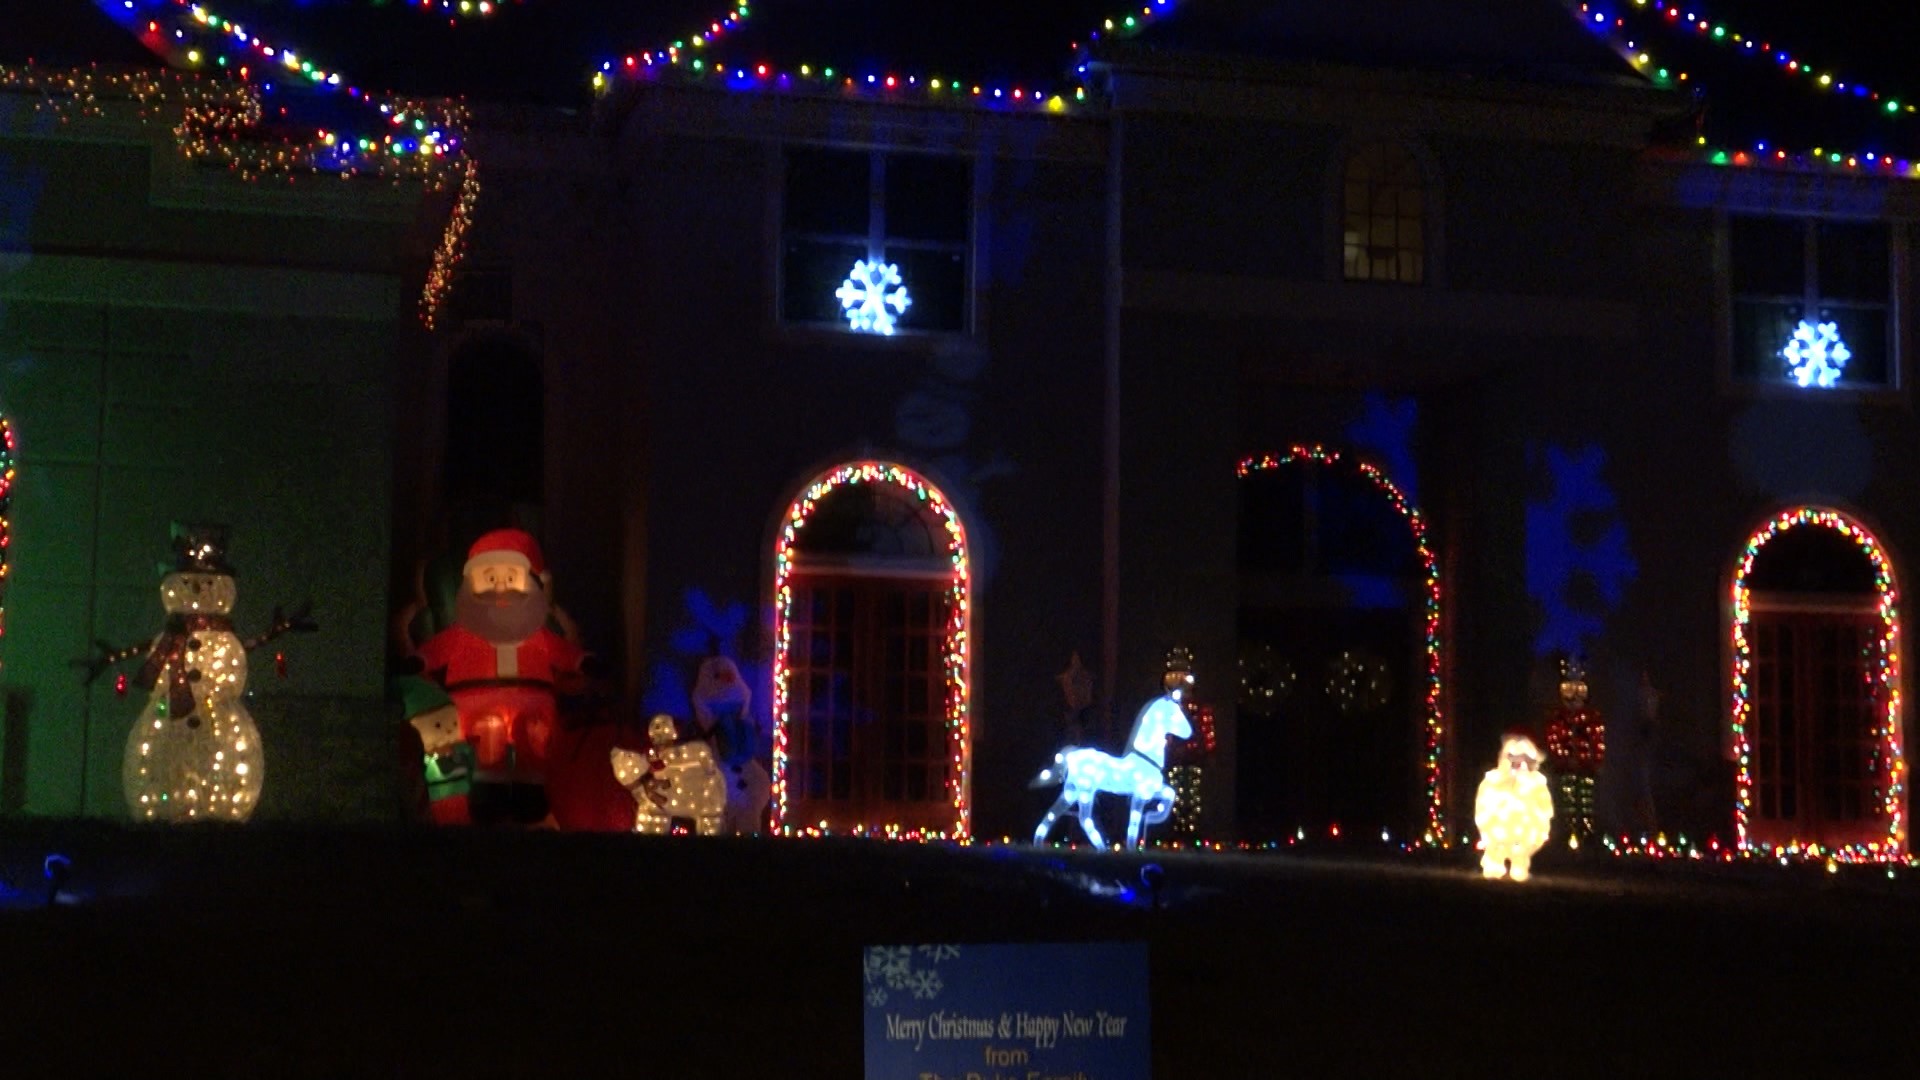 The Duke's family on Ashford Drive is going above and beyond to spread Christmas cheer this holiday season.